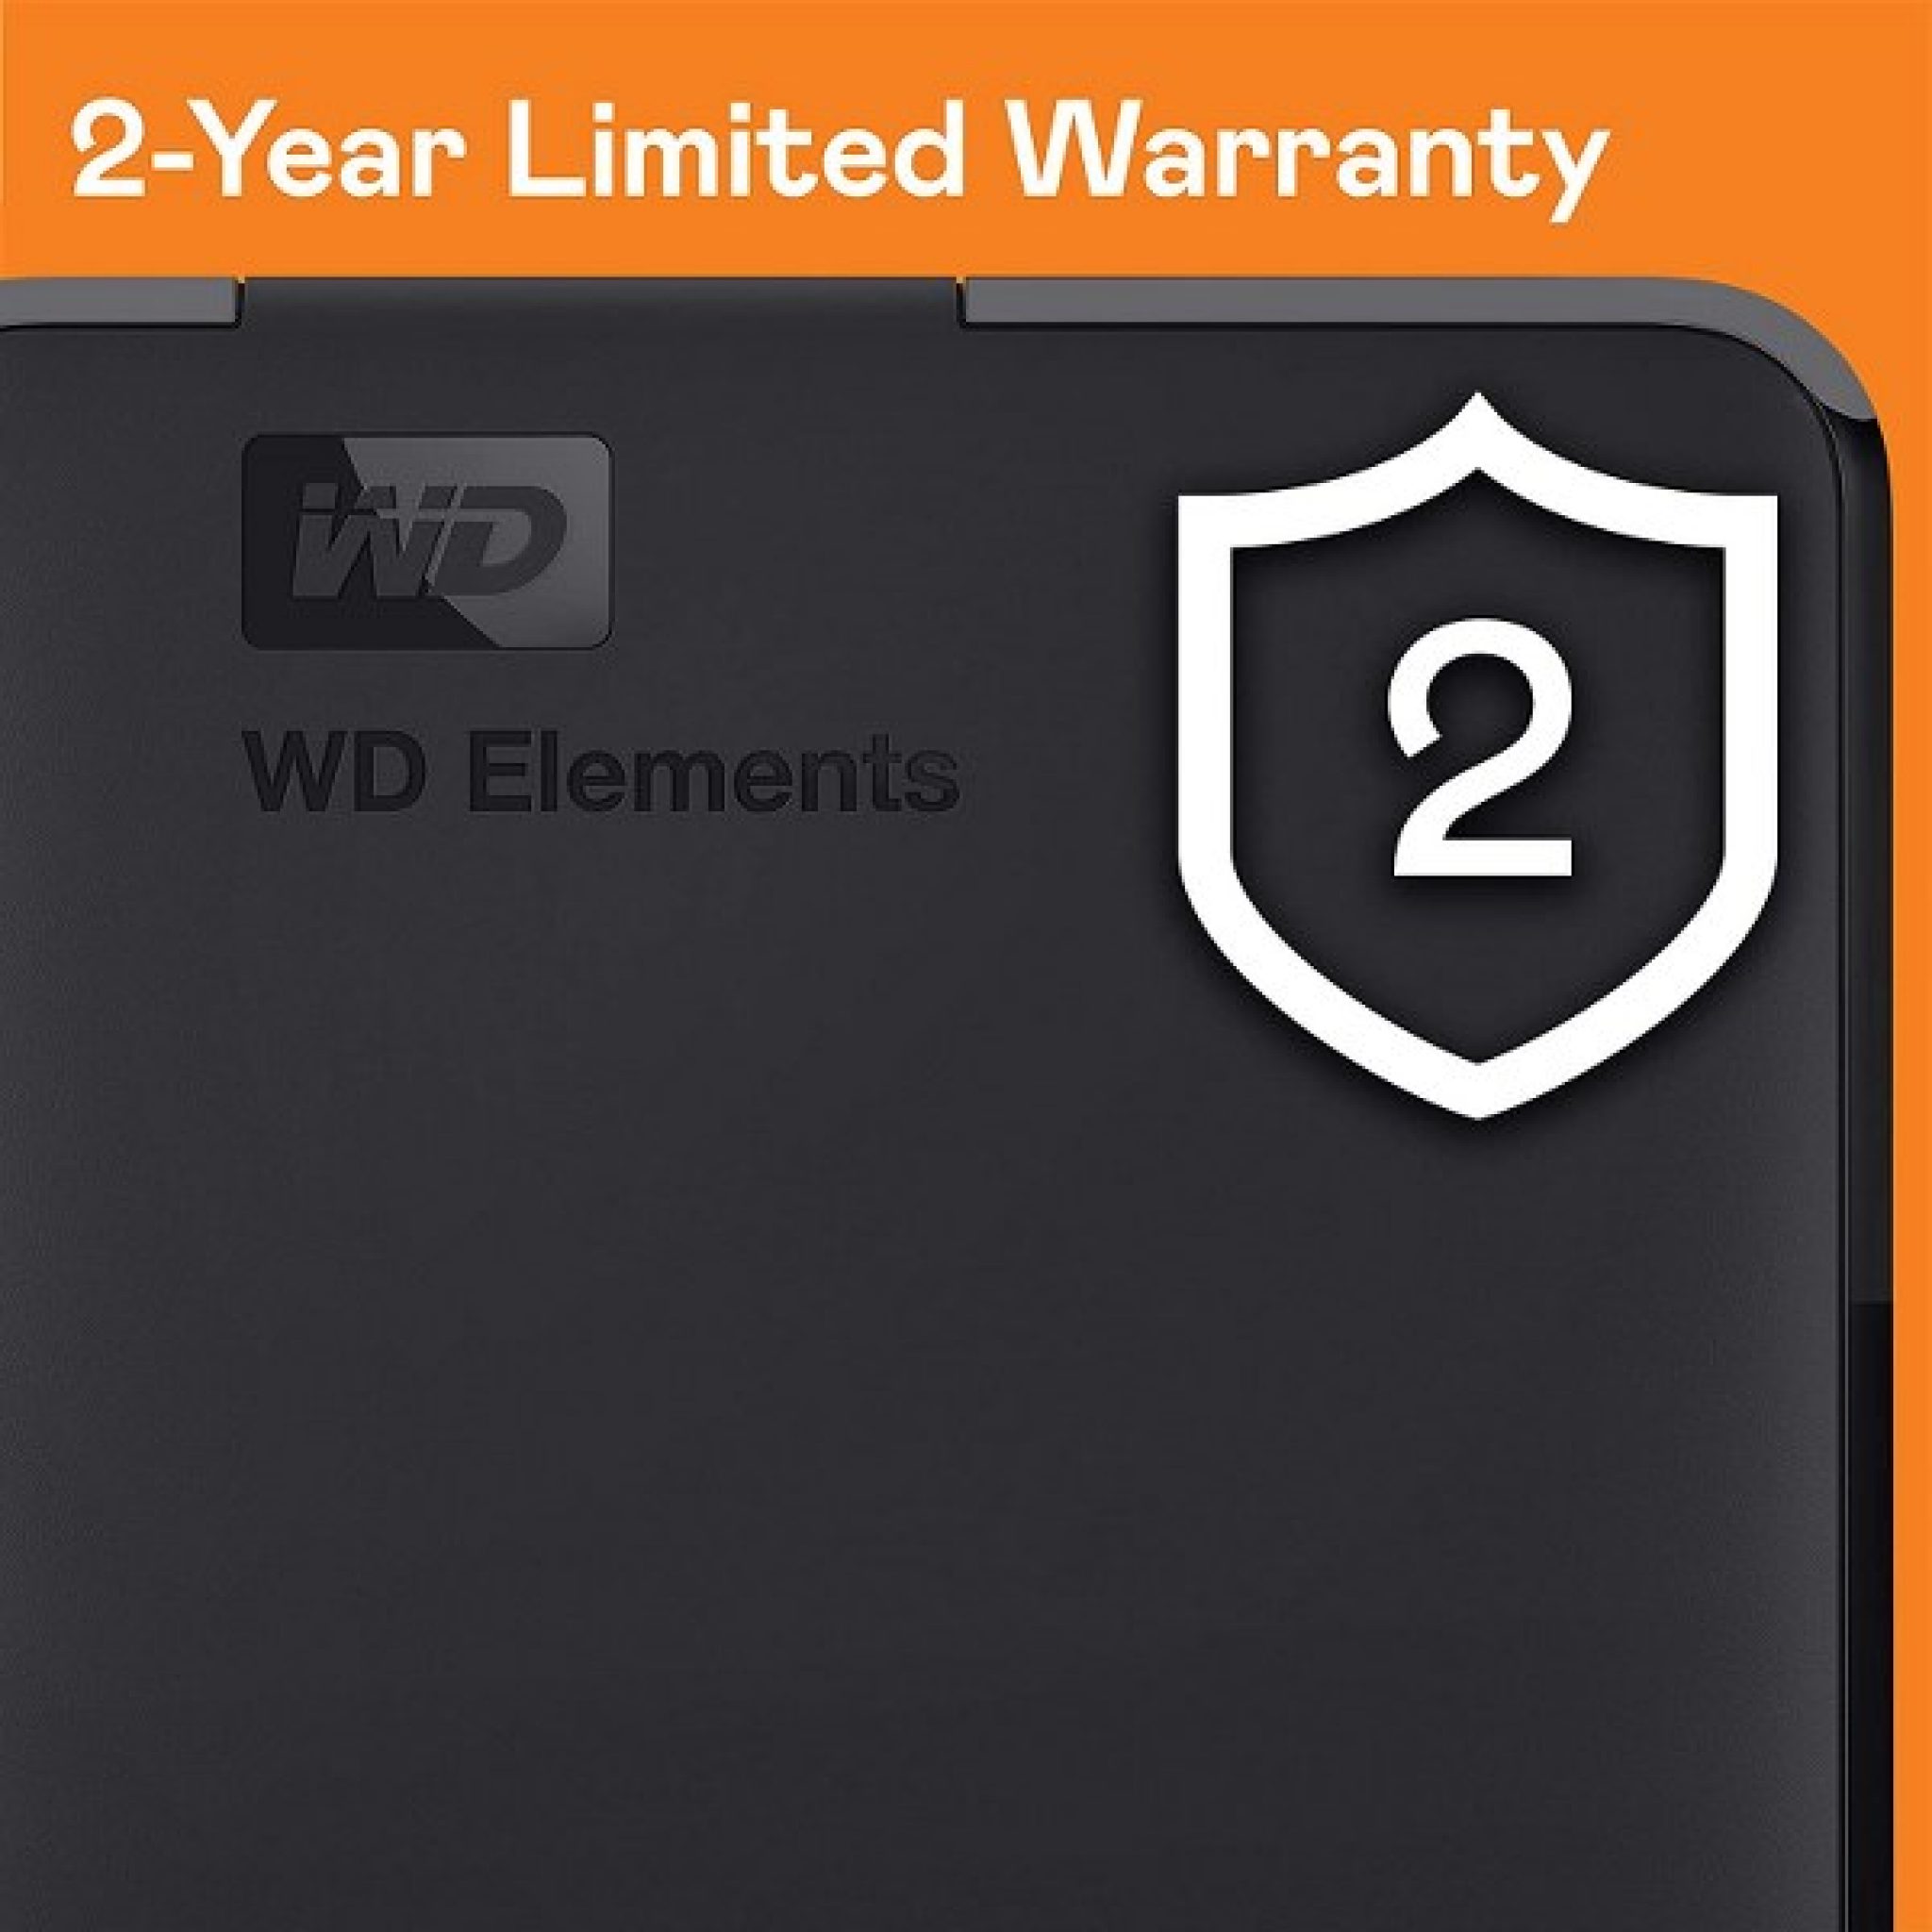 how to format wd elements 3.0 for ps4